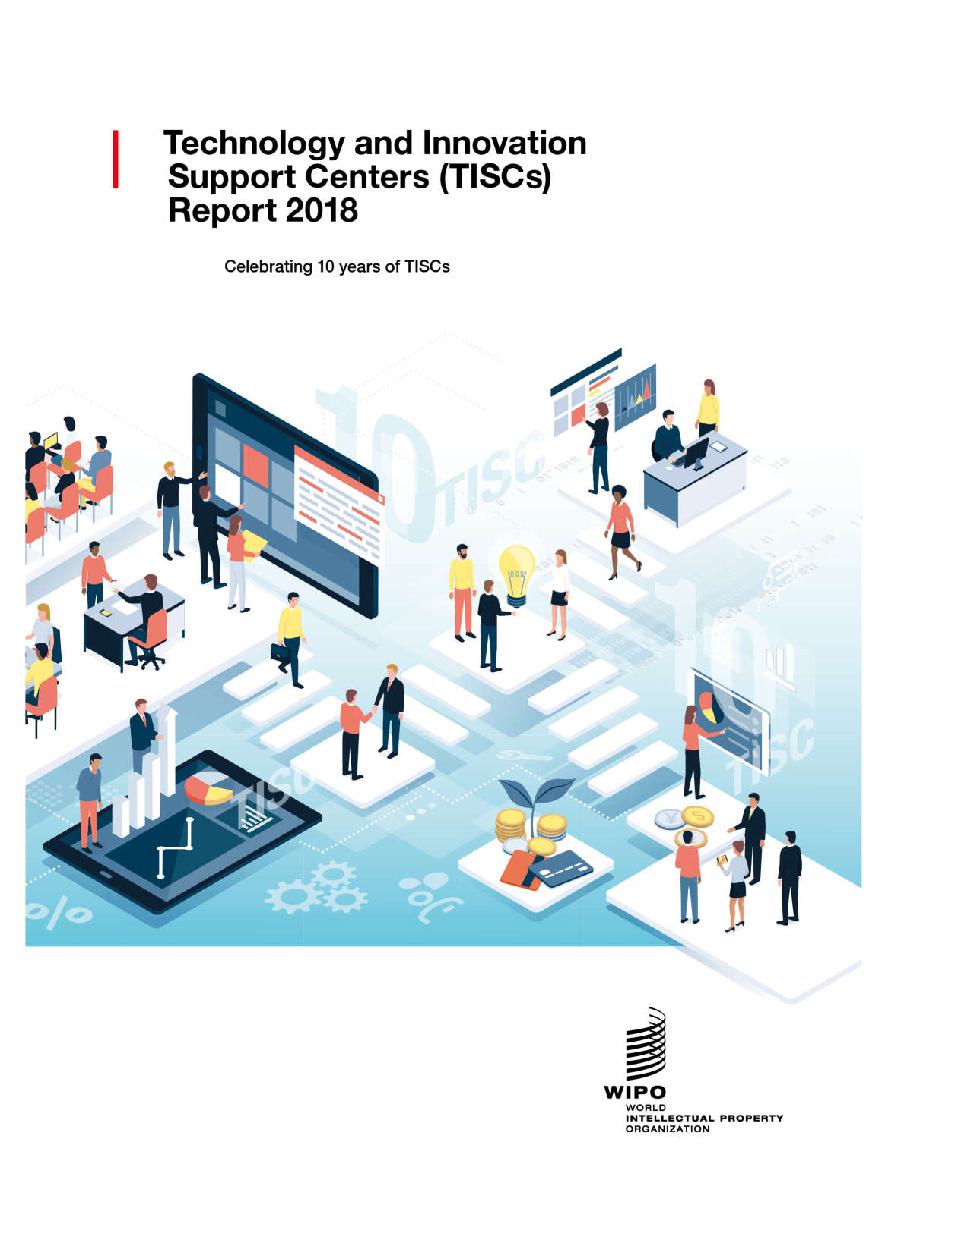 Technology and Innovation Support Centers (TISCs) Report 2018